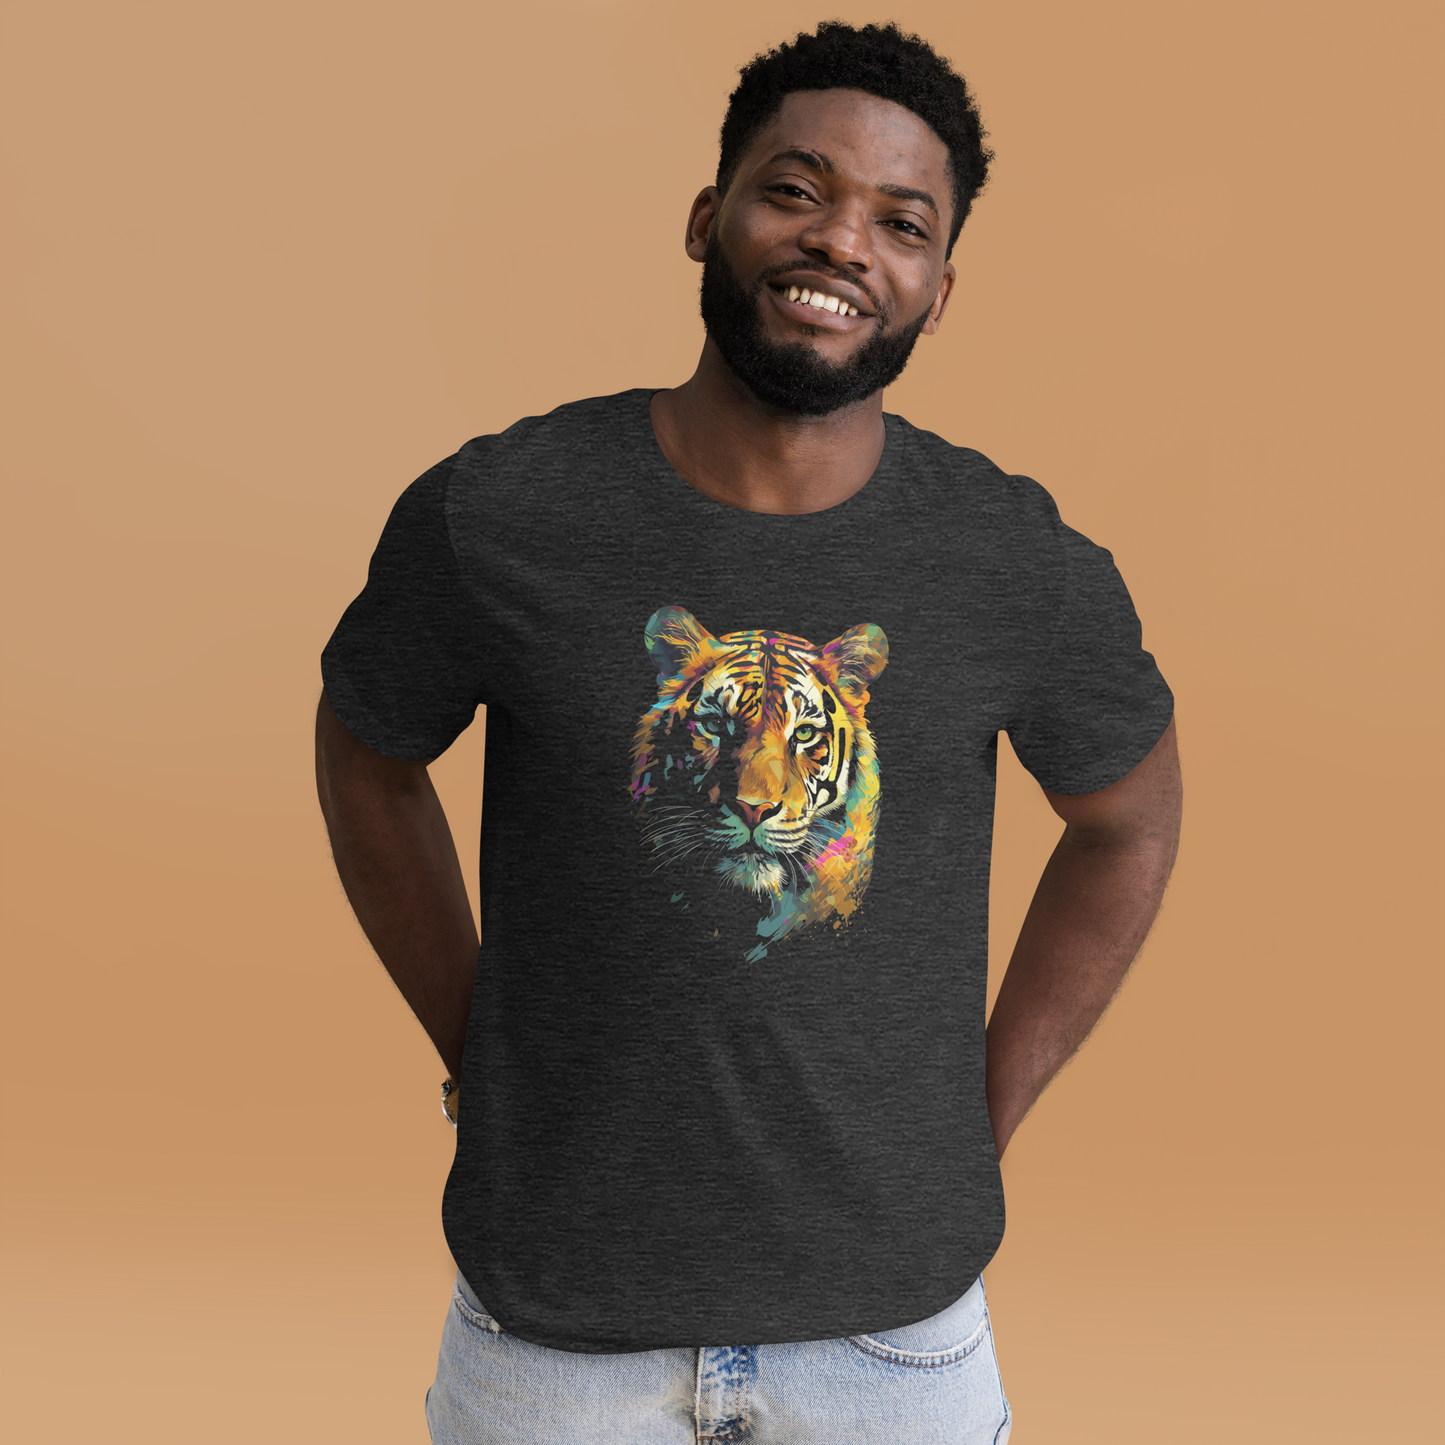 Stunning Tiger Face Print: Roar into Style with Our Unisex T-Shirts